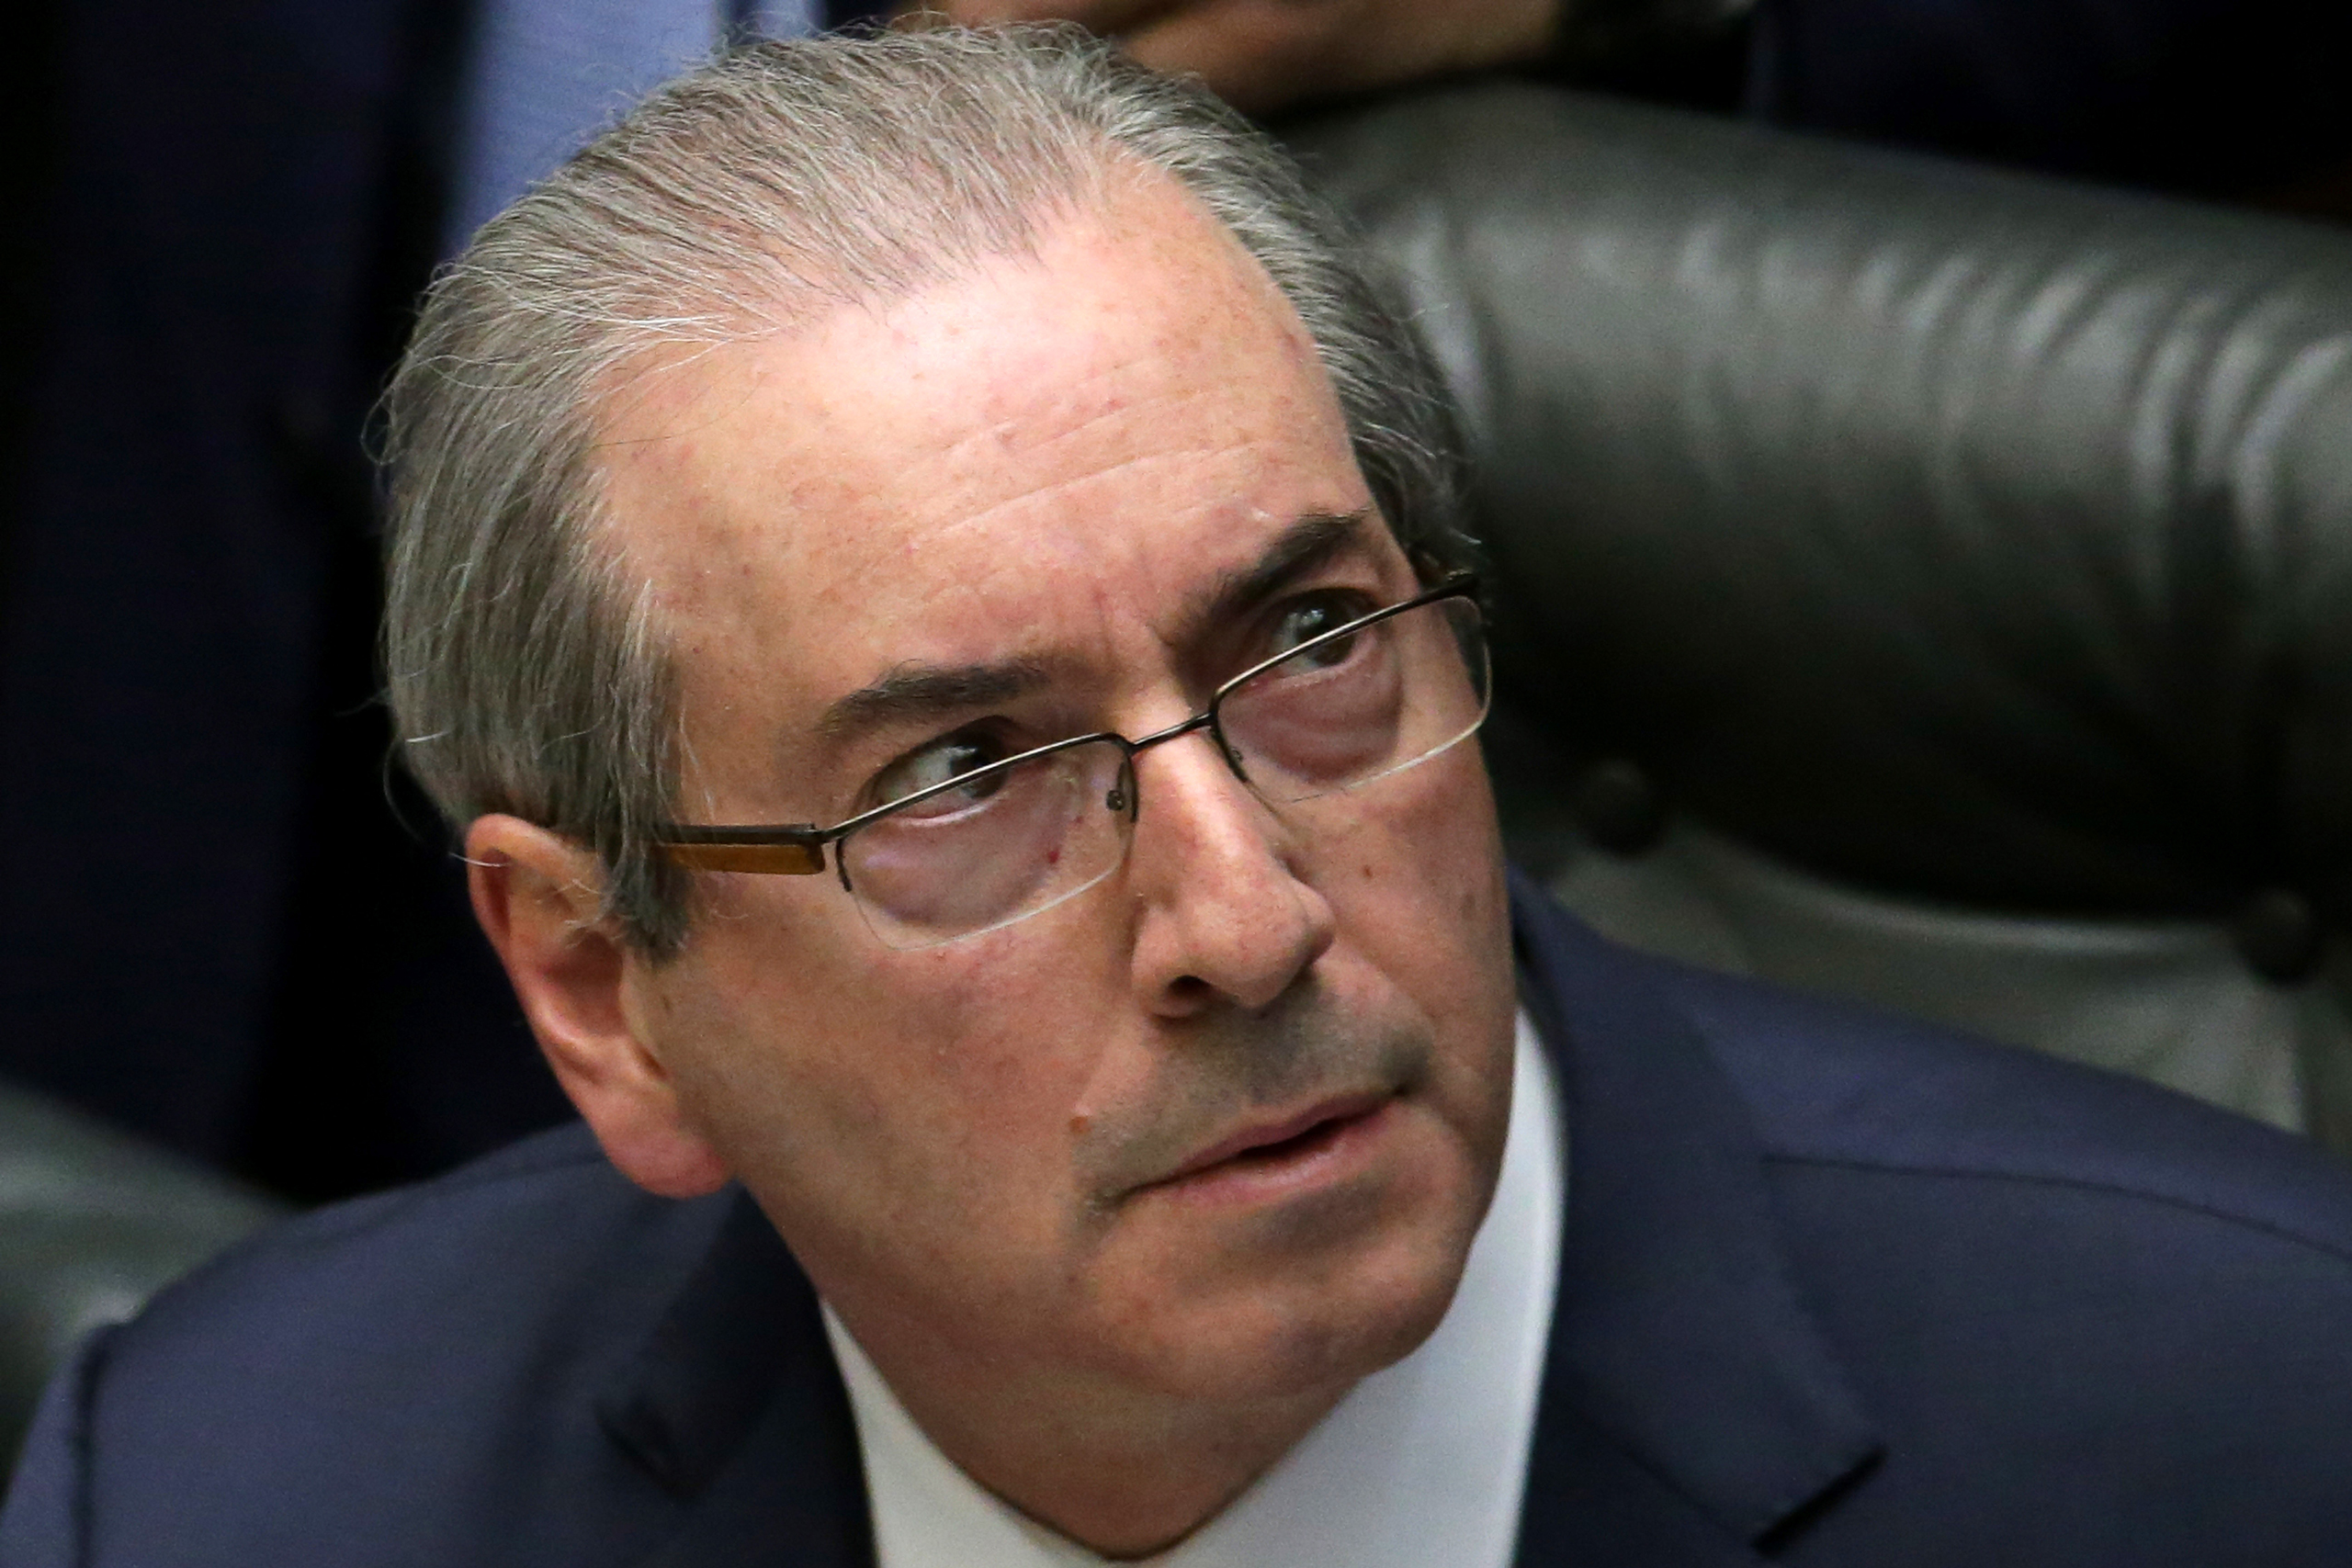 Brazilian House Speaker Eduardo Cunha attends a debate on whether or not to impeach the president, at the Chamber of Deputies in Brasilia on Apr. 15, 2016. (Eraldo Peres—AP)